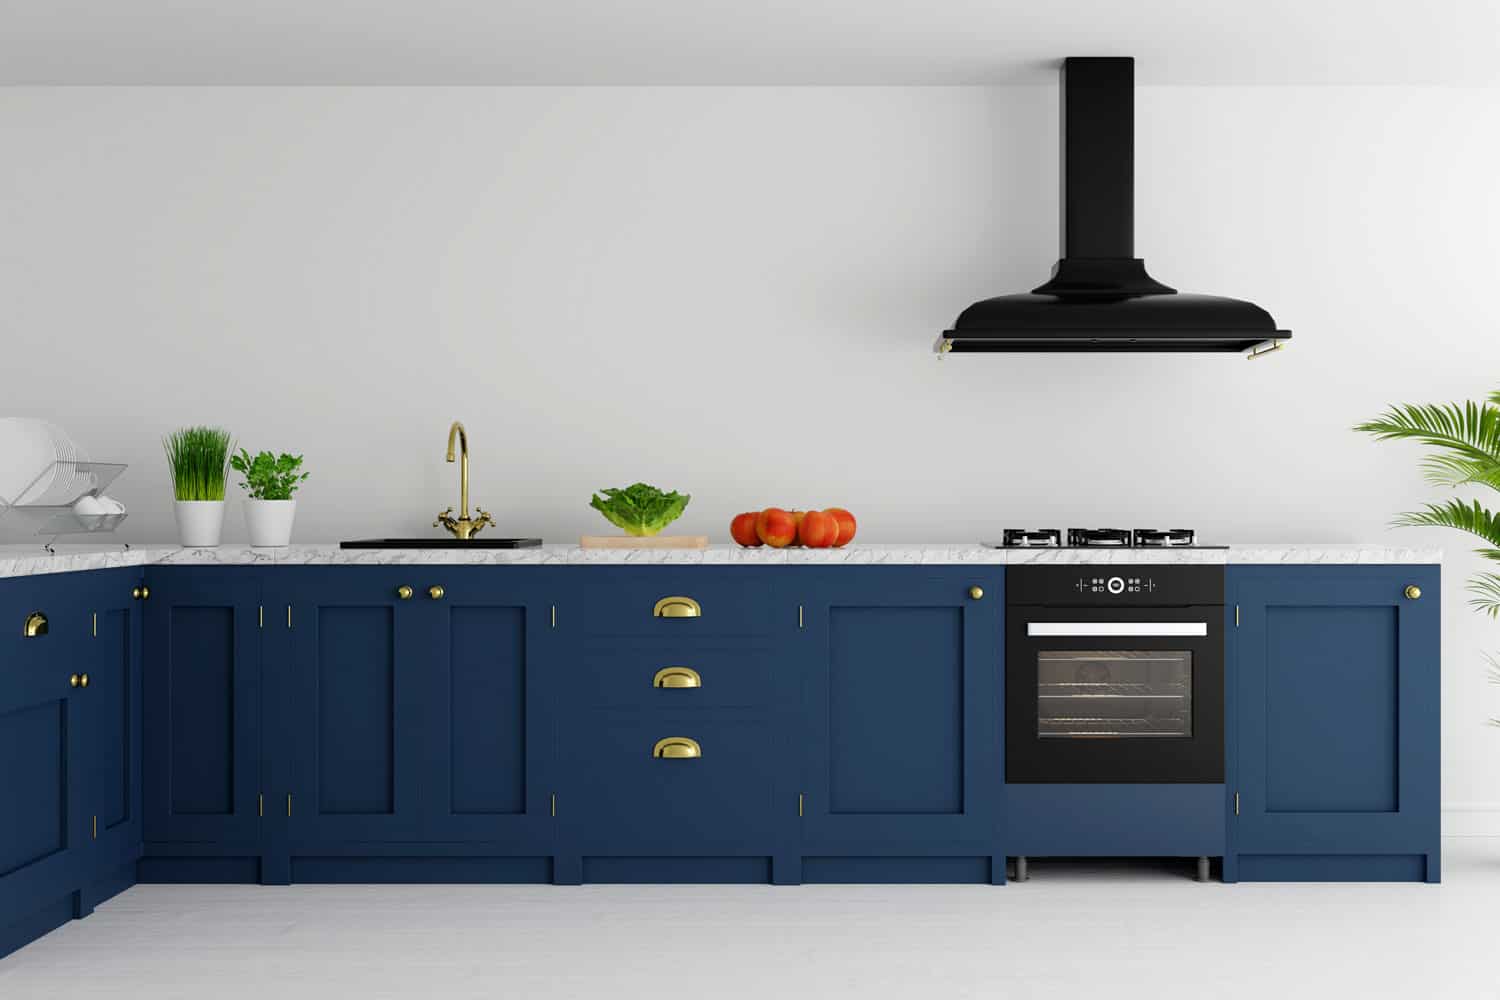 Blue kitchen cabinets combination with black stainless appliances